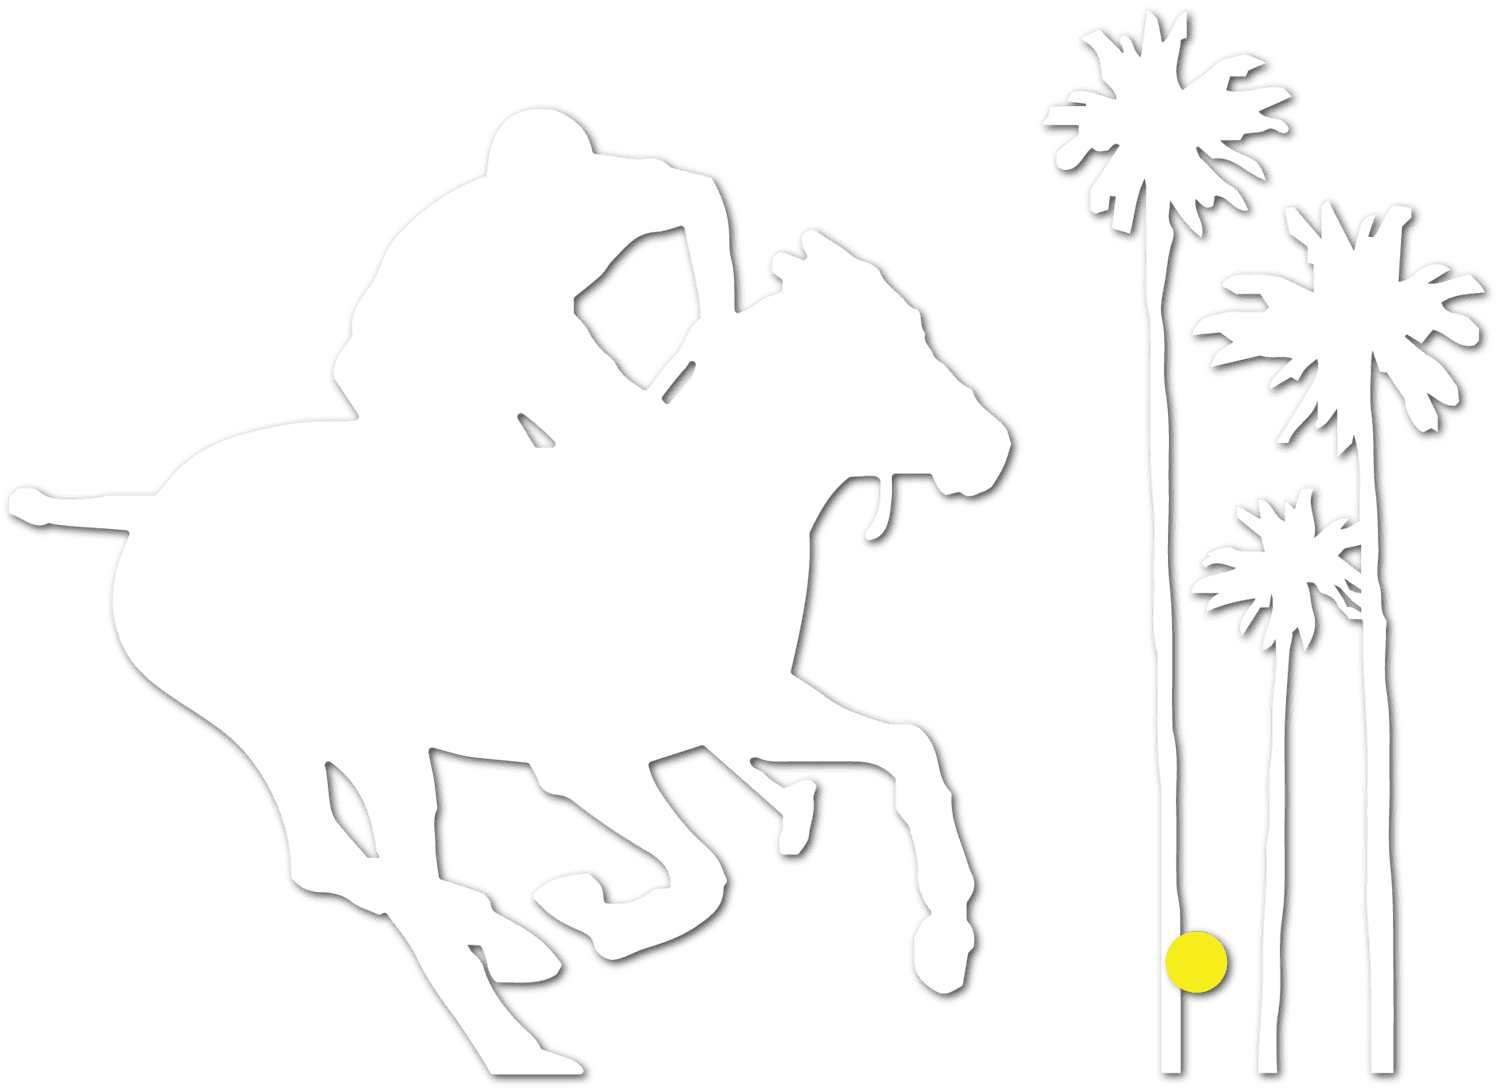 a drawing of a man riding a horse next to palm trees.